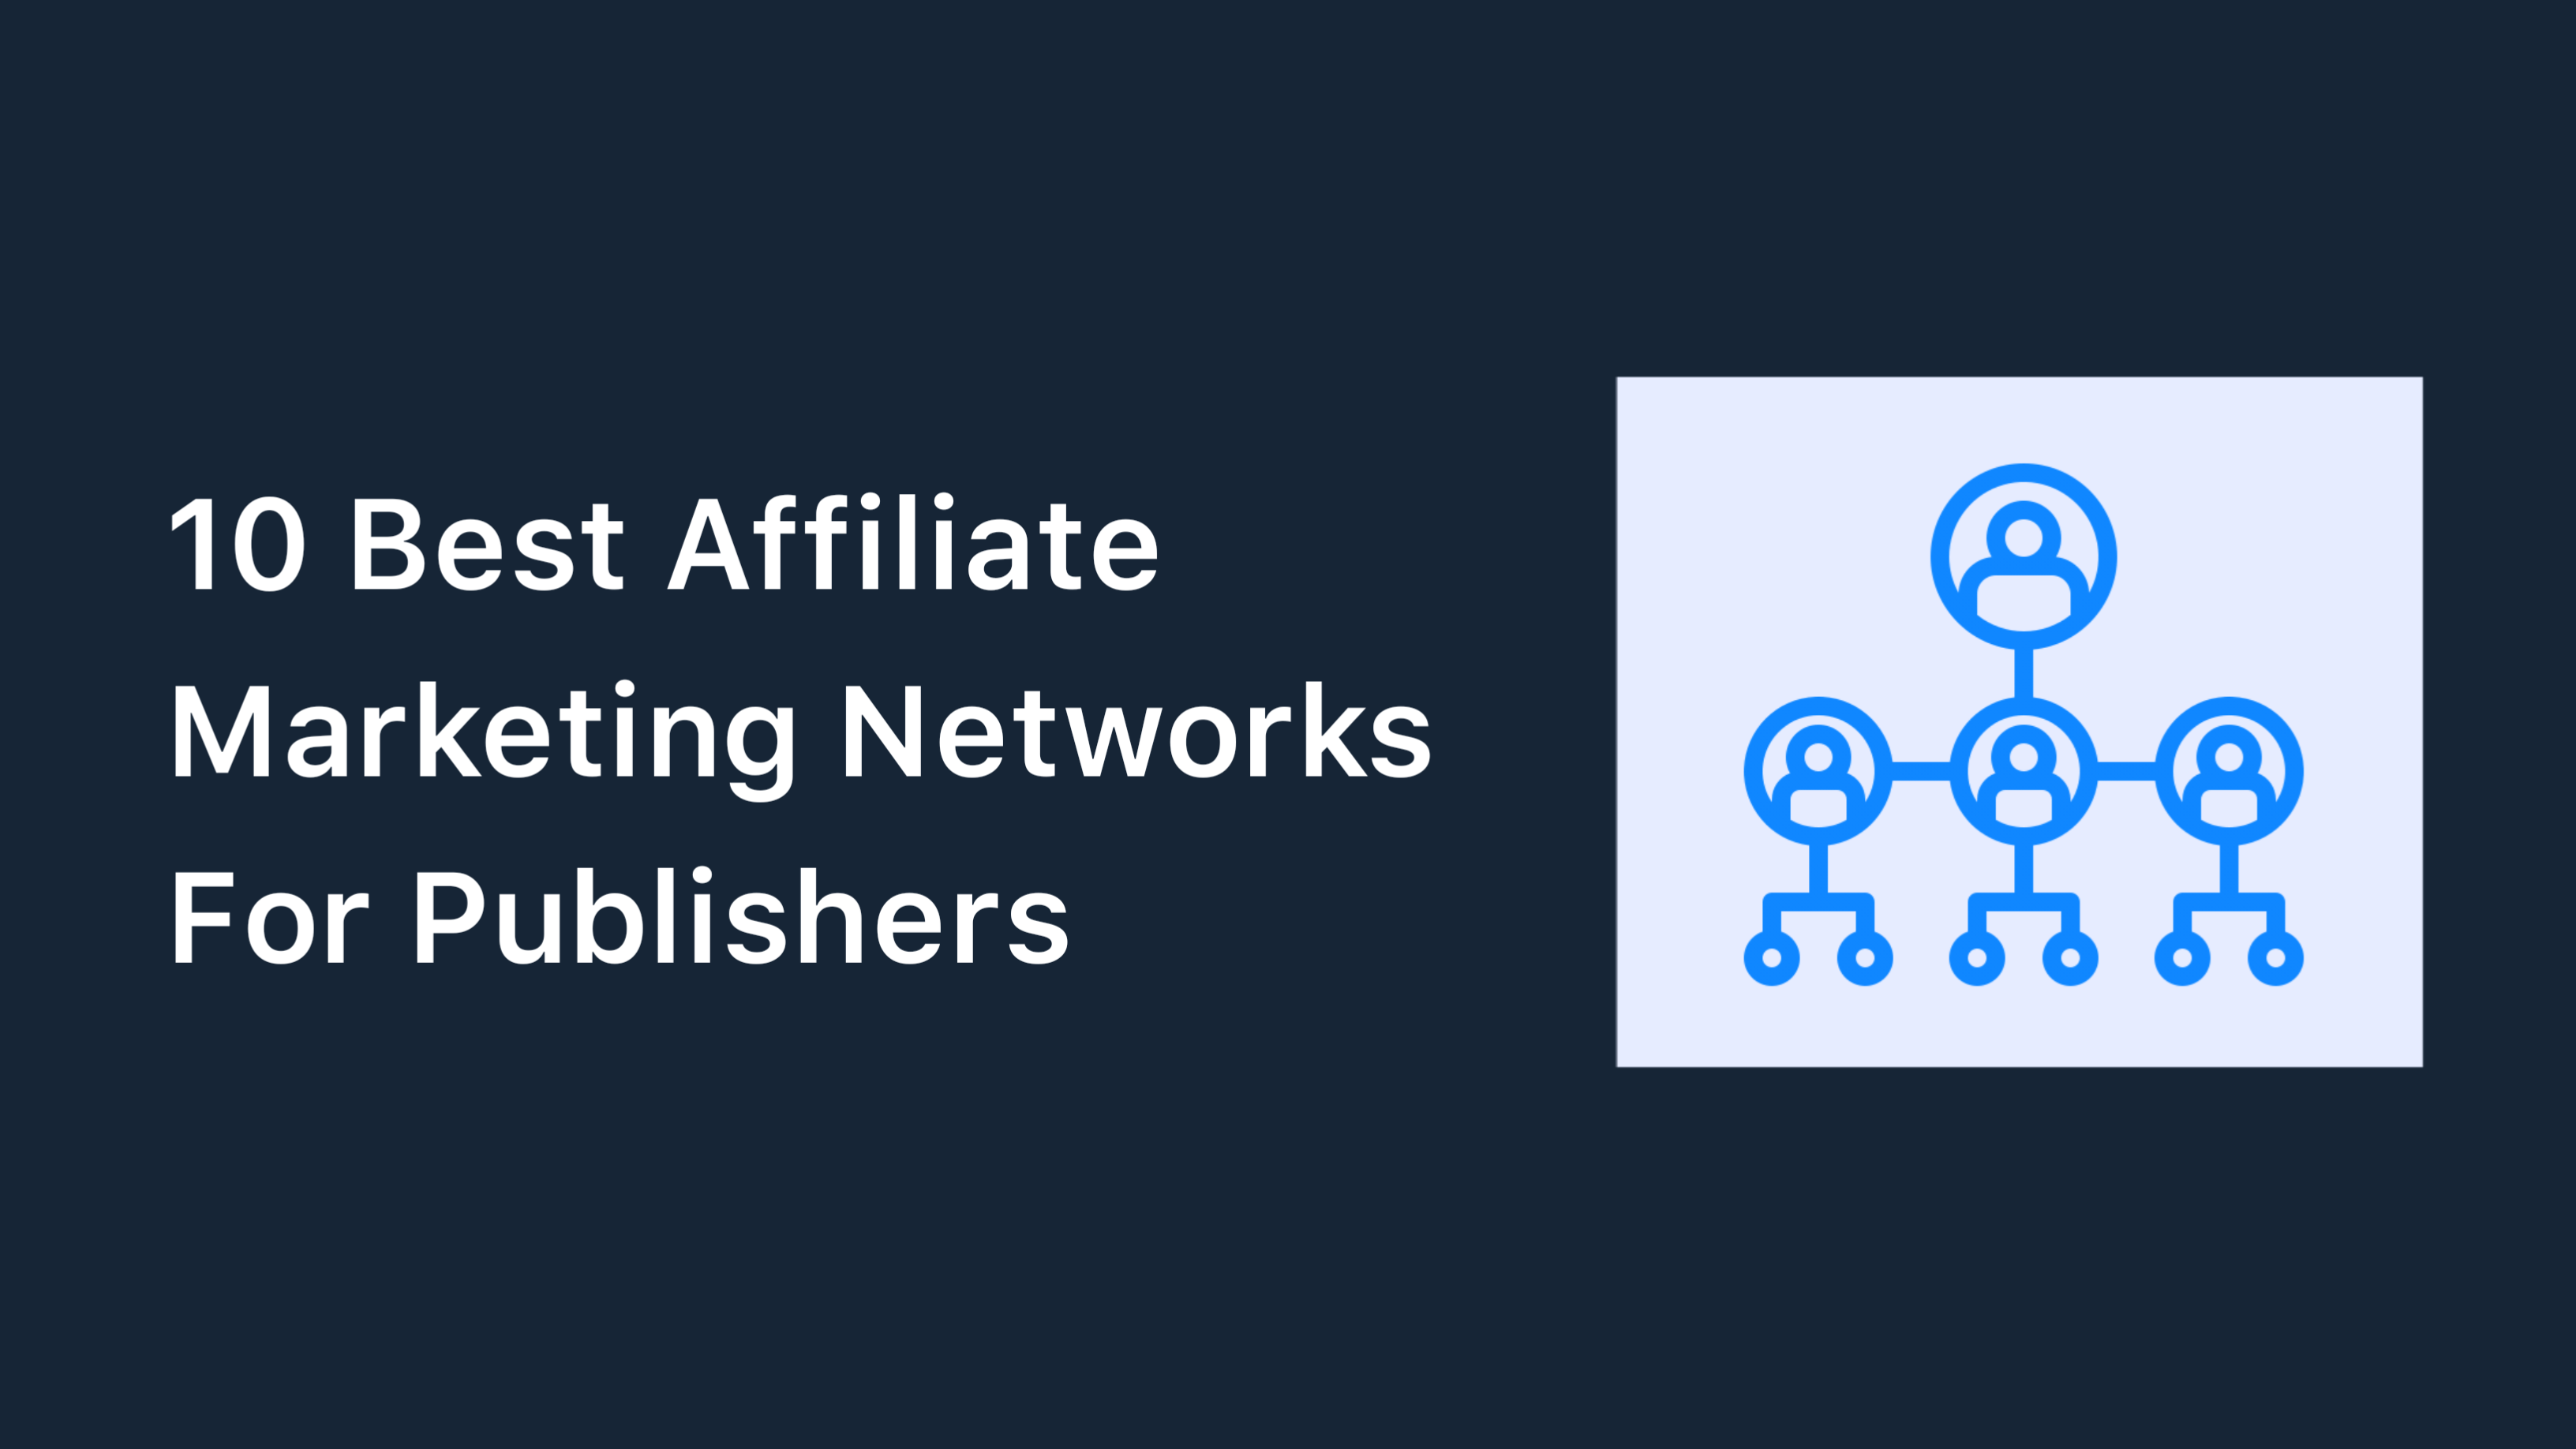 10 Best Affiliate Marketing Networks For Publishers